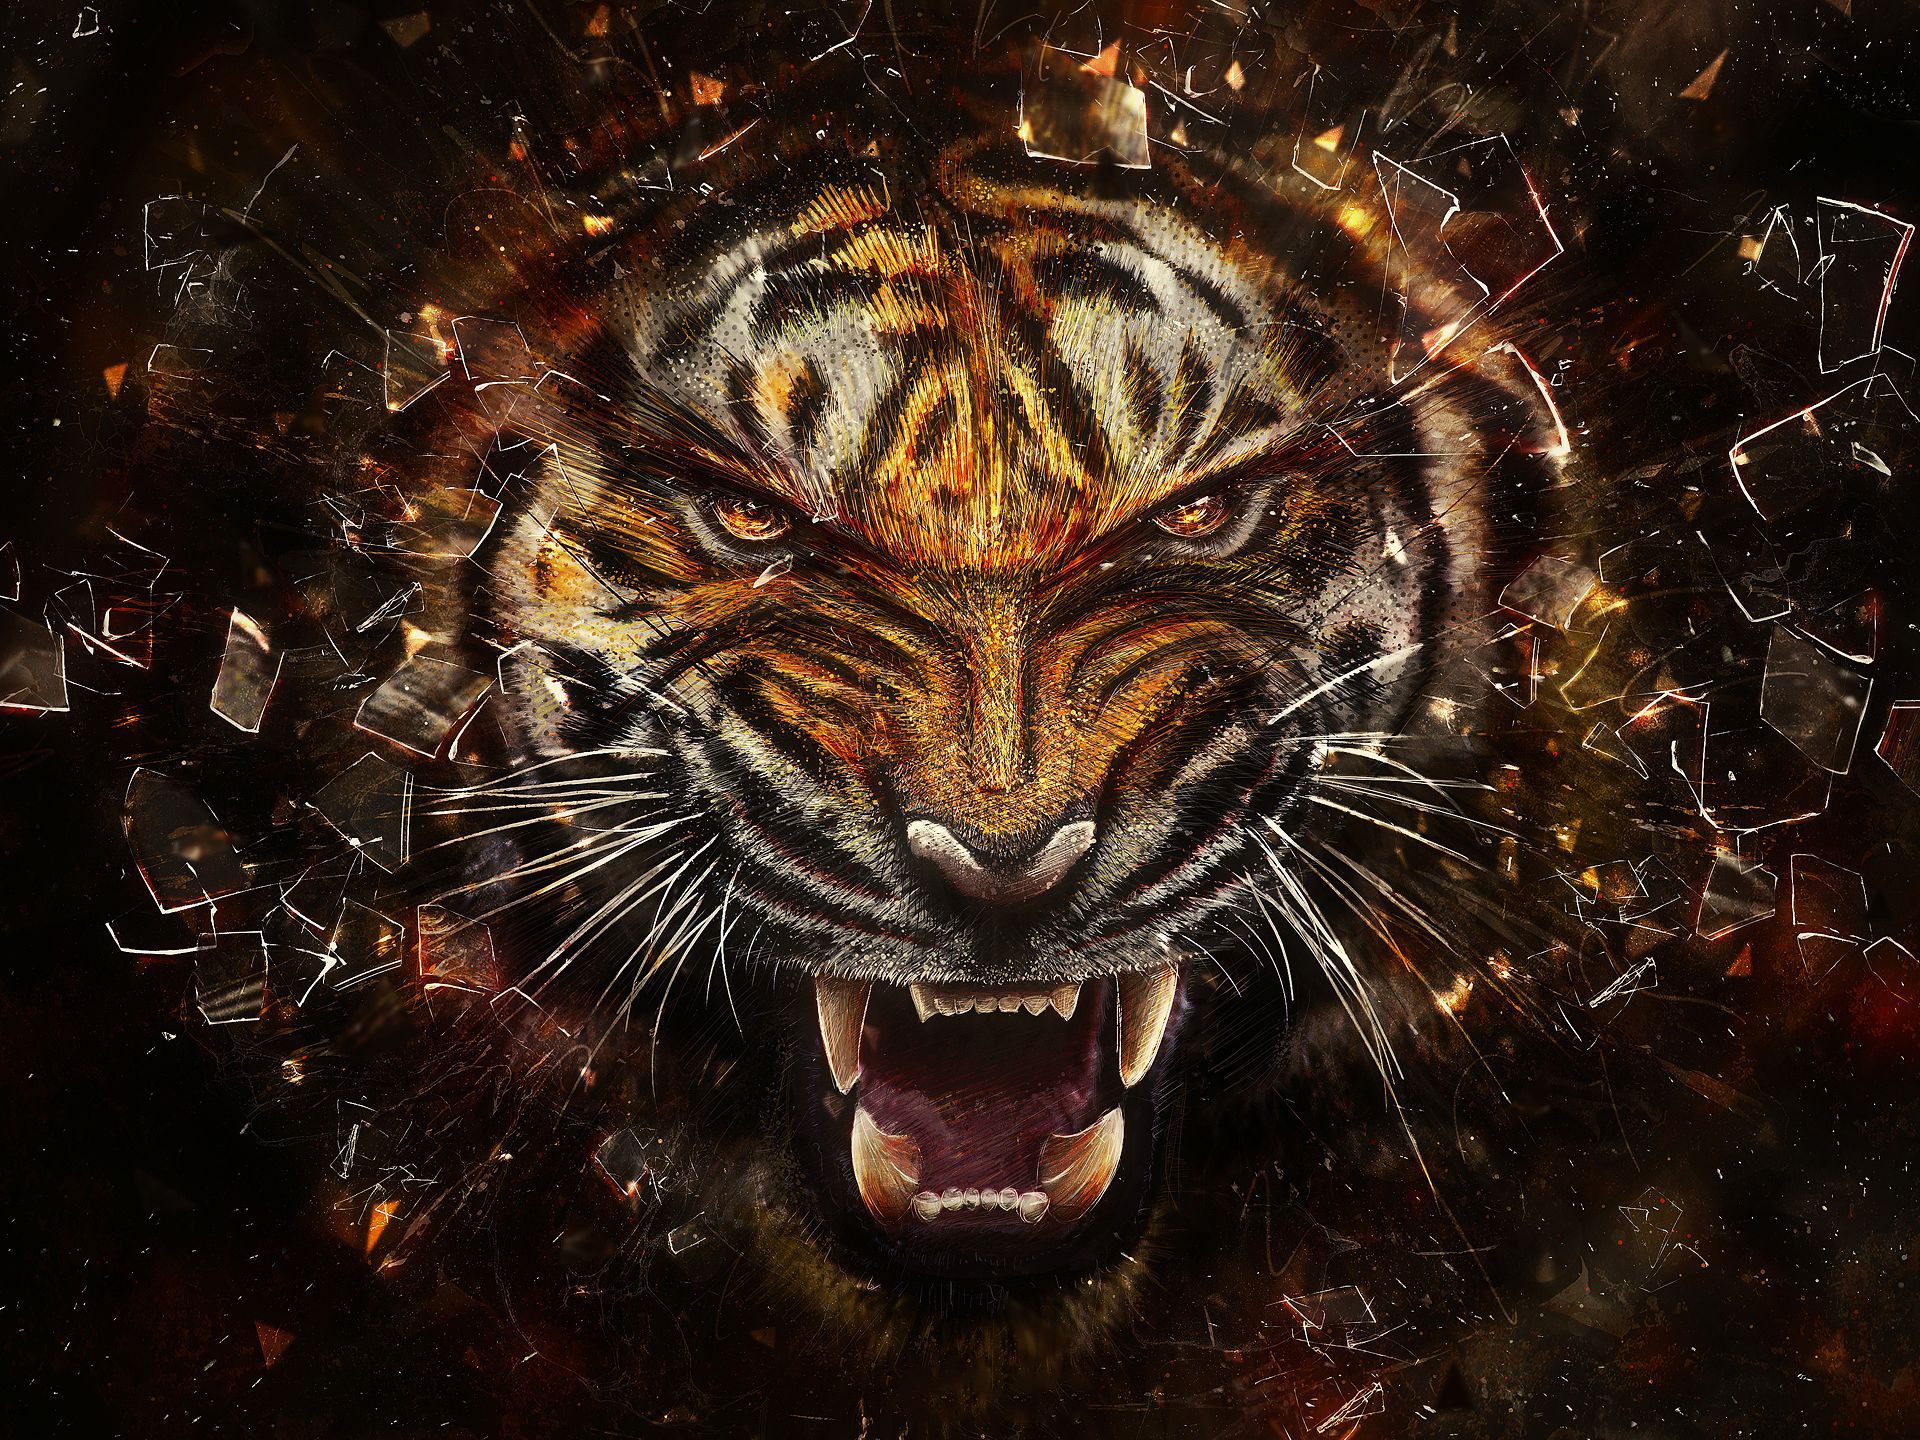 Cool Wallpapers Of Tigers - HD Wallpaper 